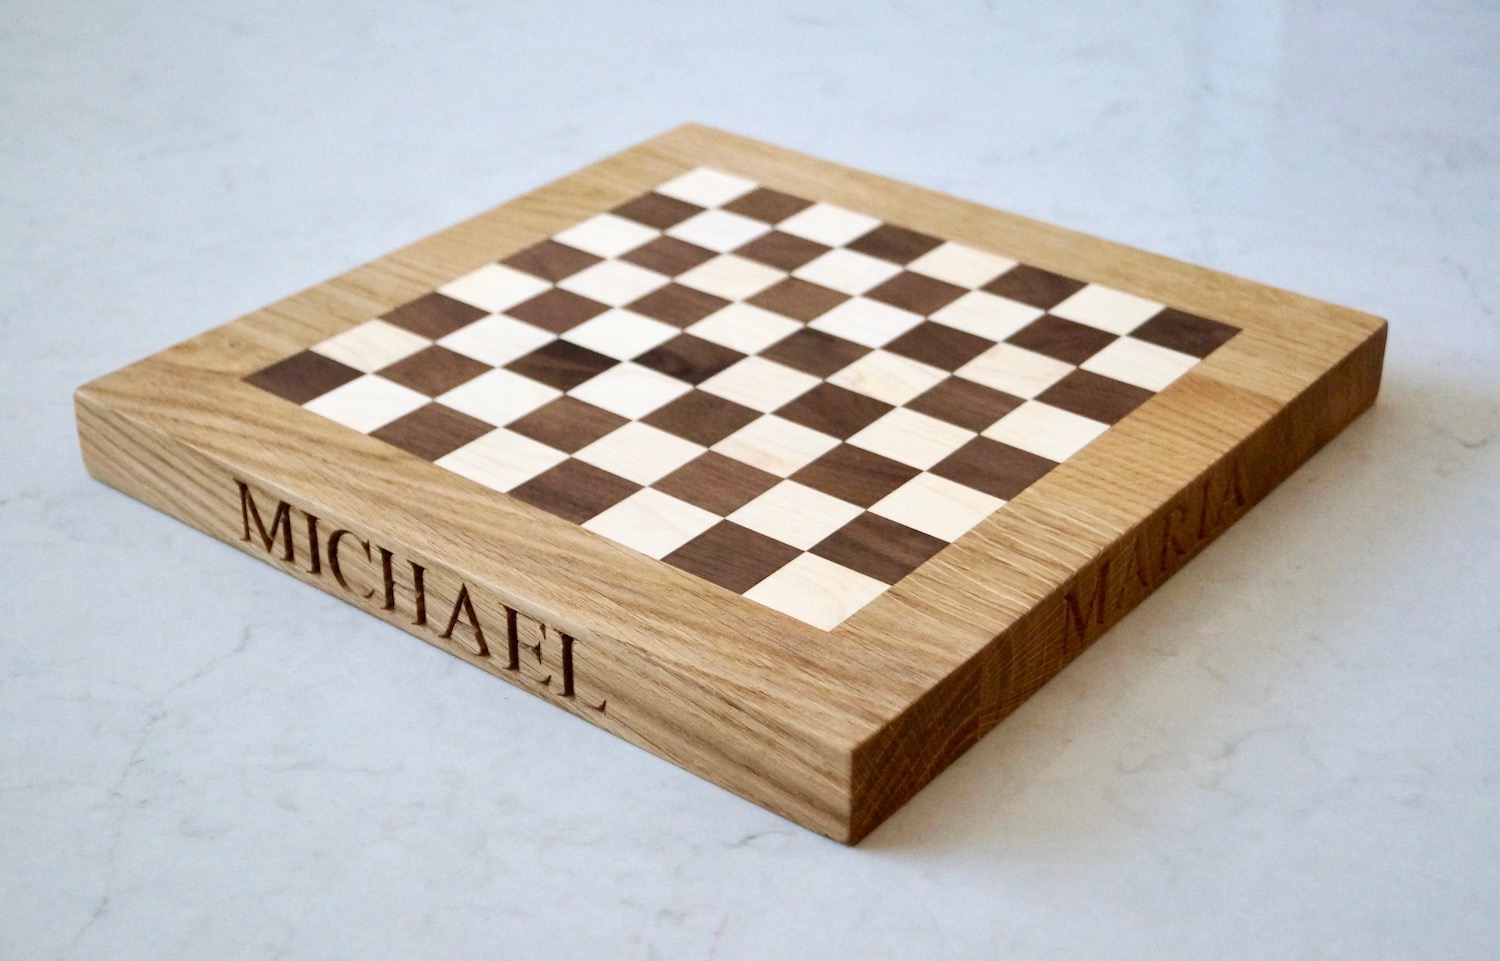 Custom hand crafted chess board only 